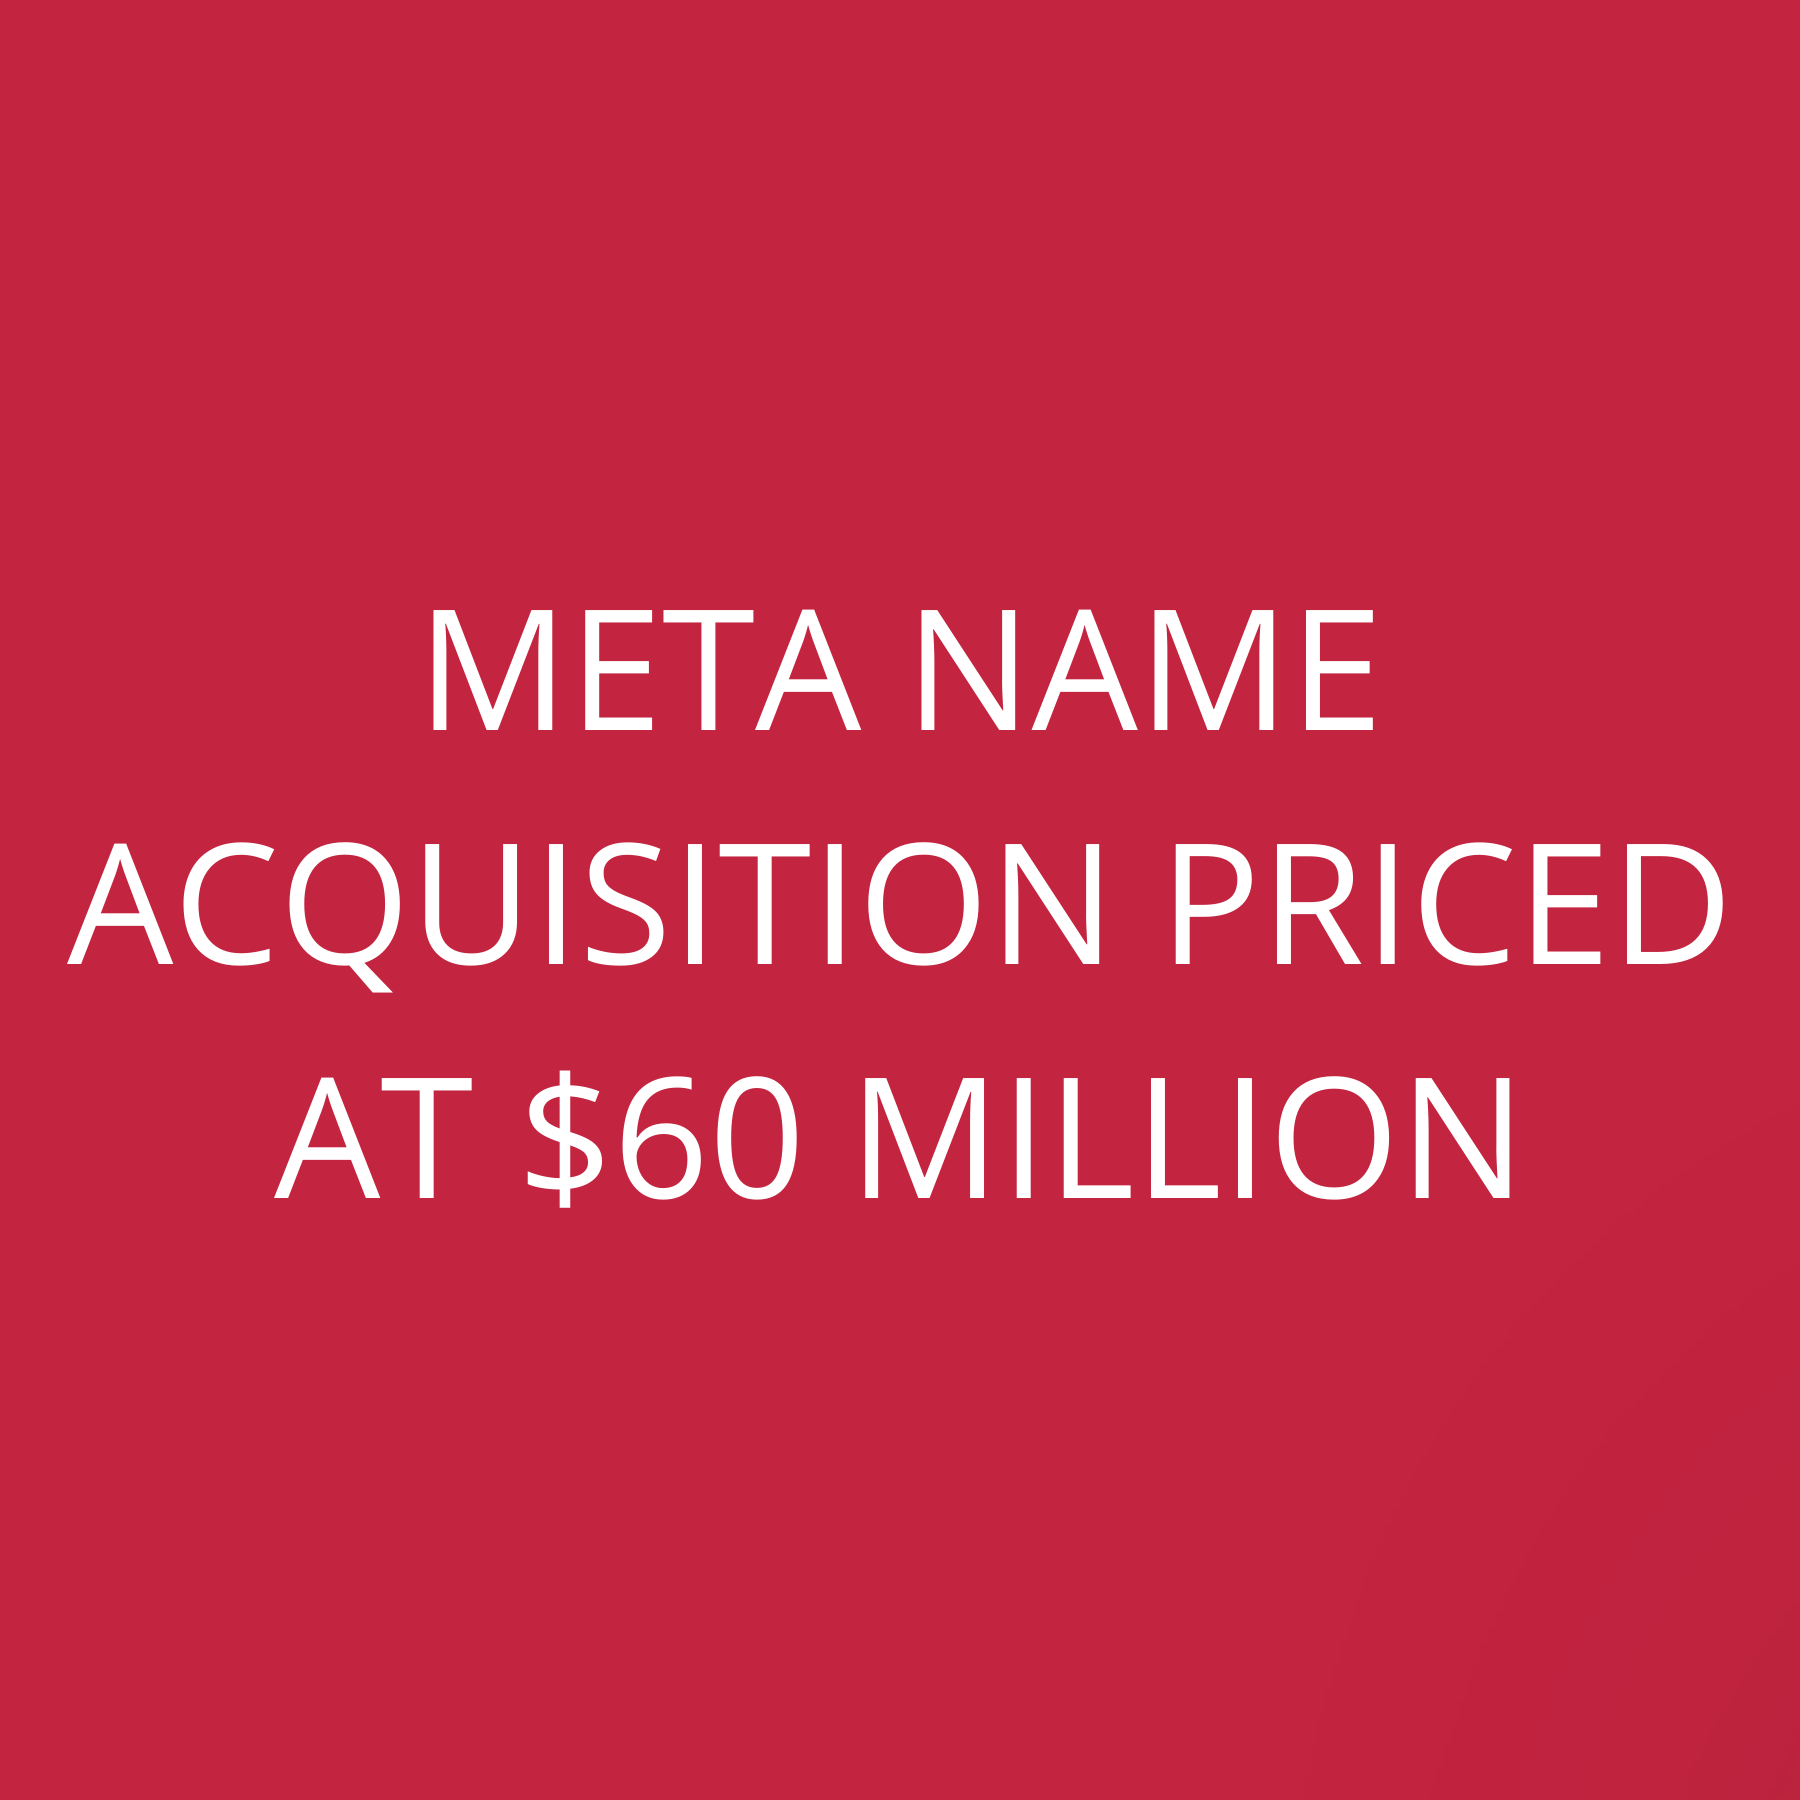 Meta name acquisition priced at $60 million